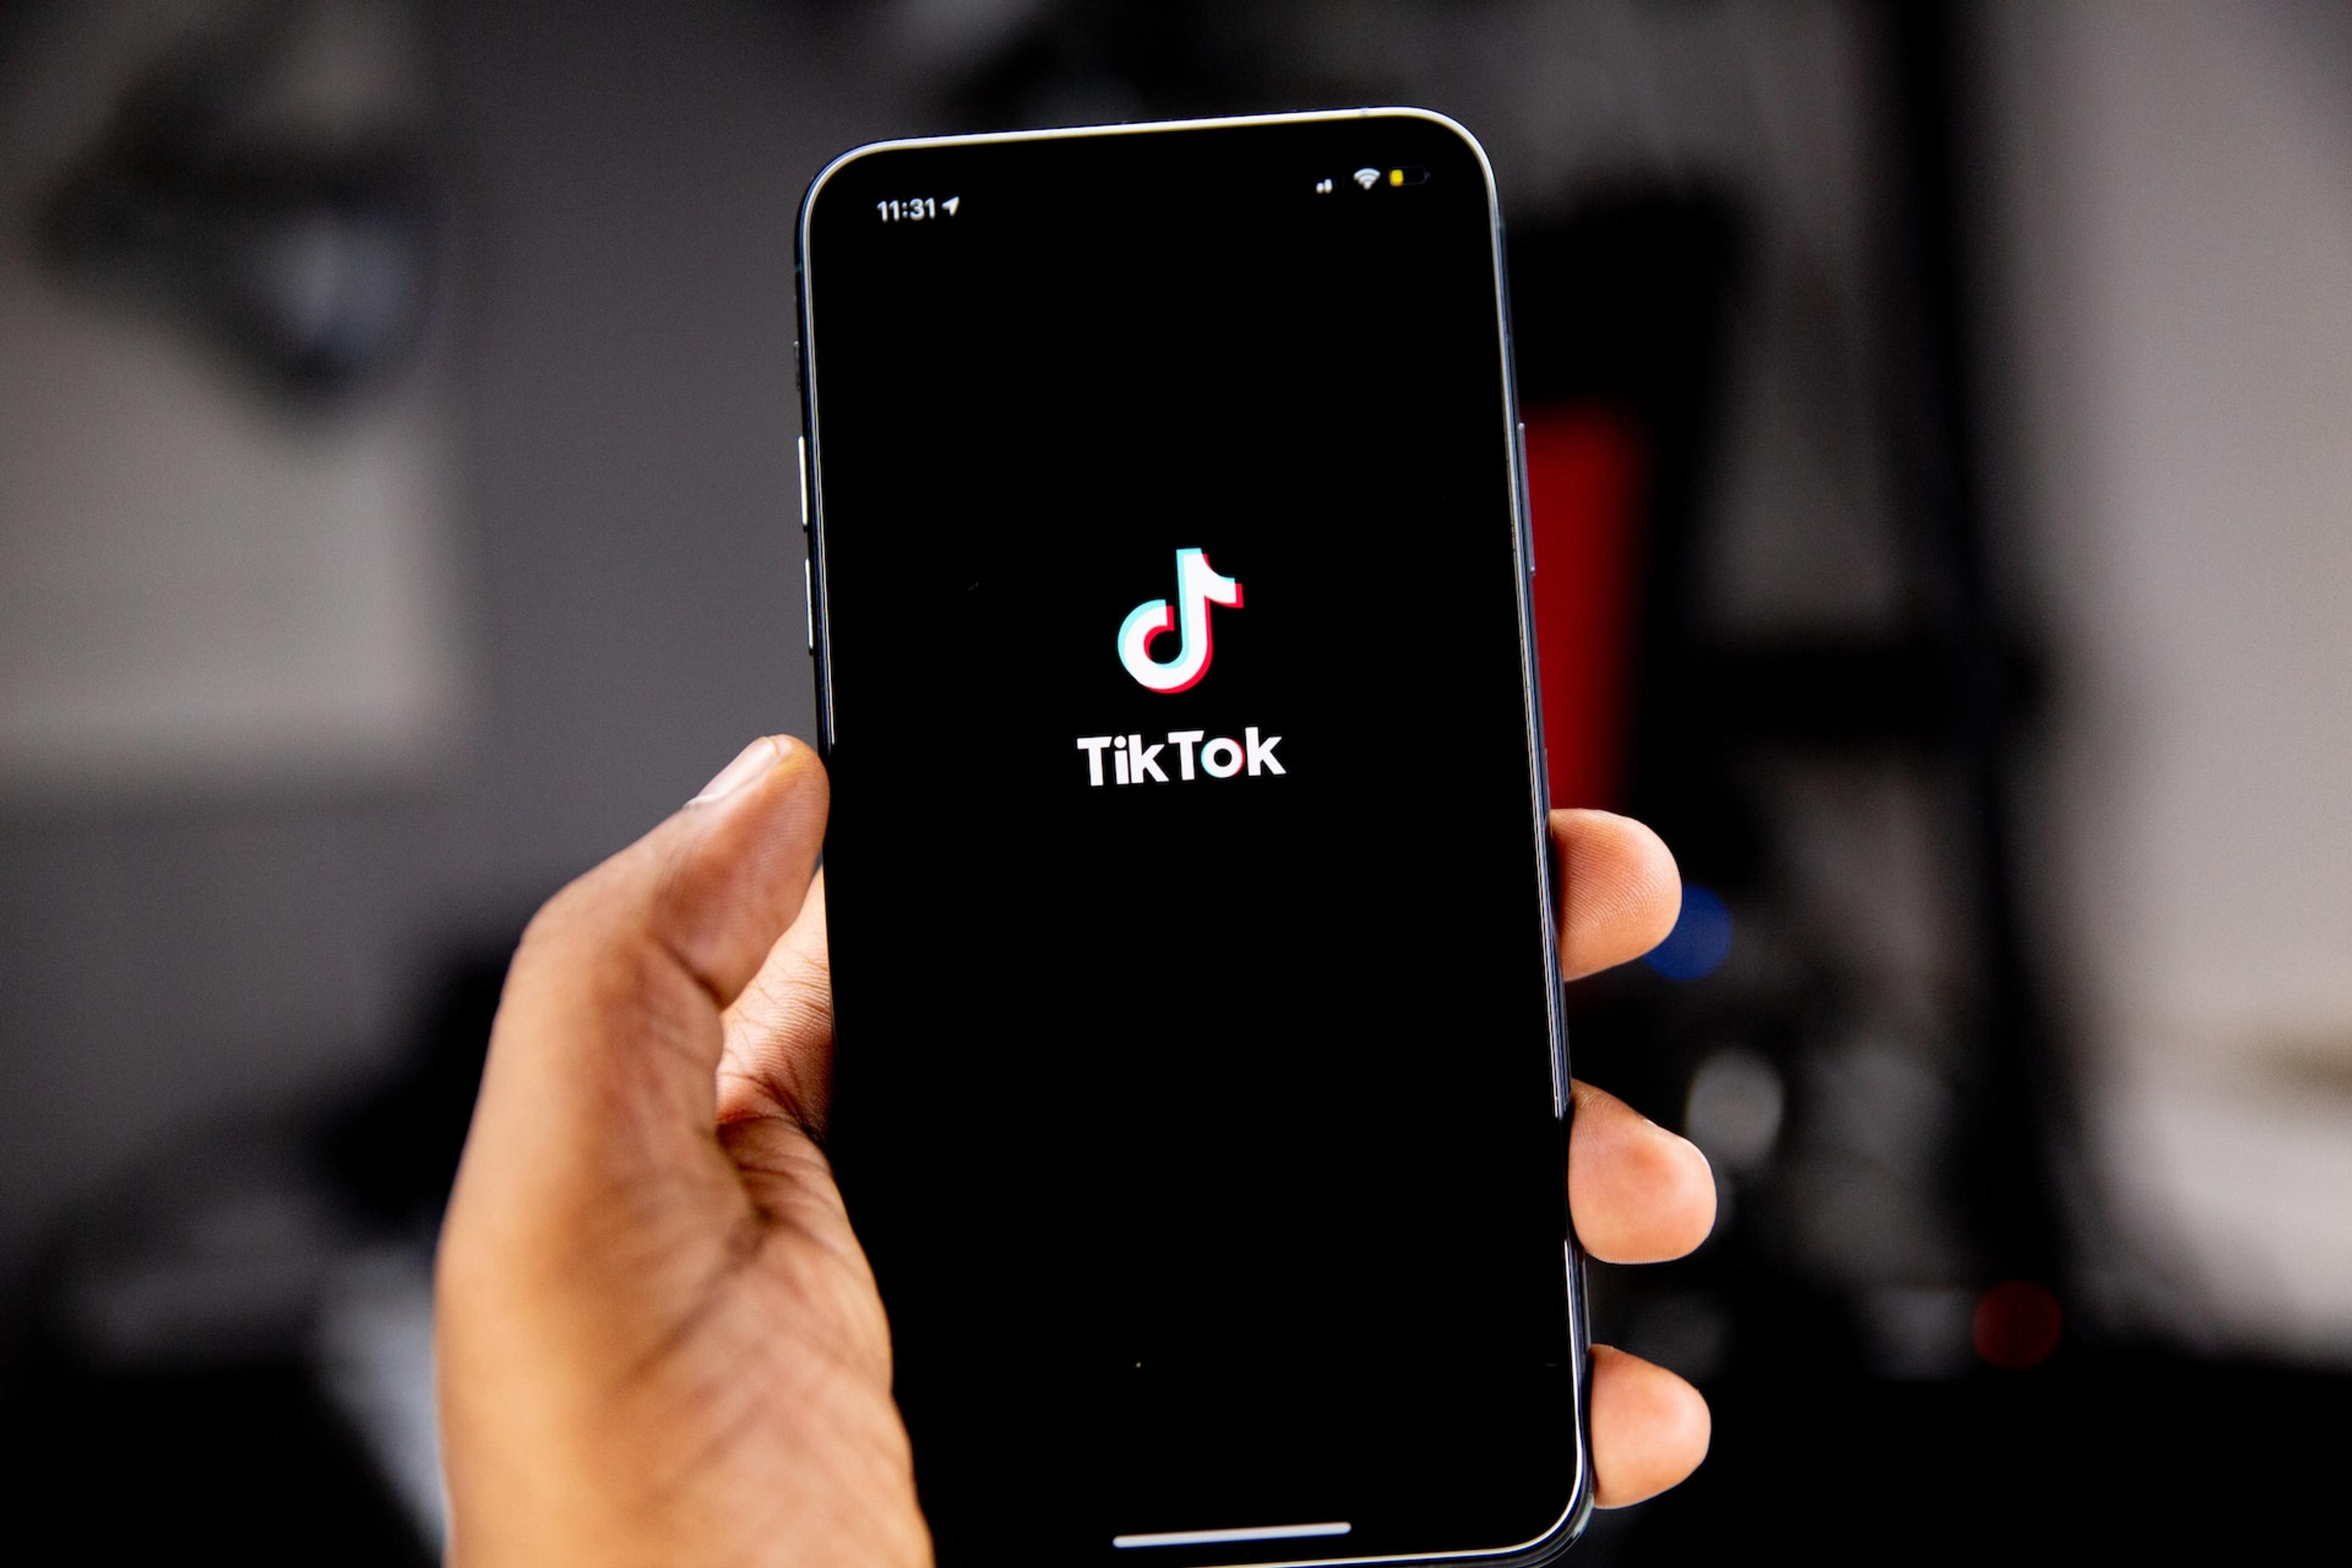 A person holding a smartphone while TikTok is opening.